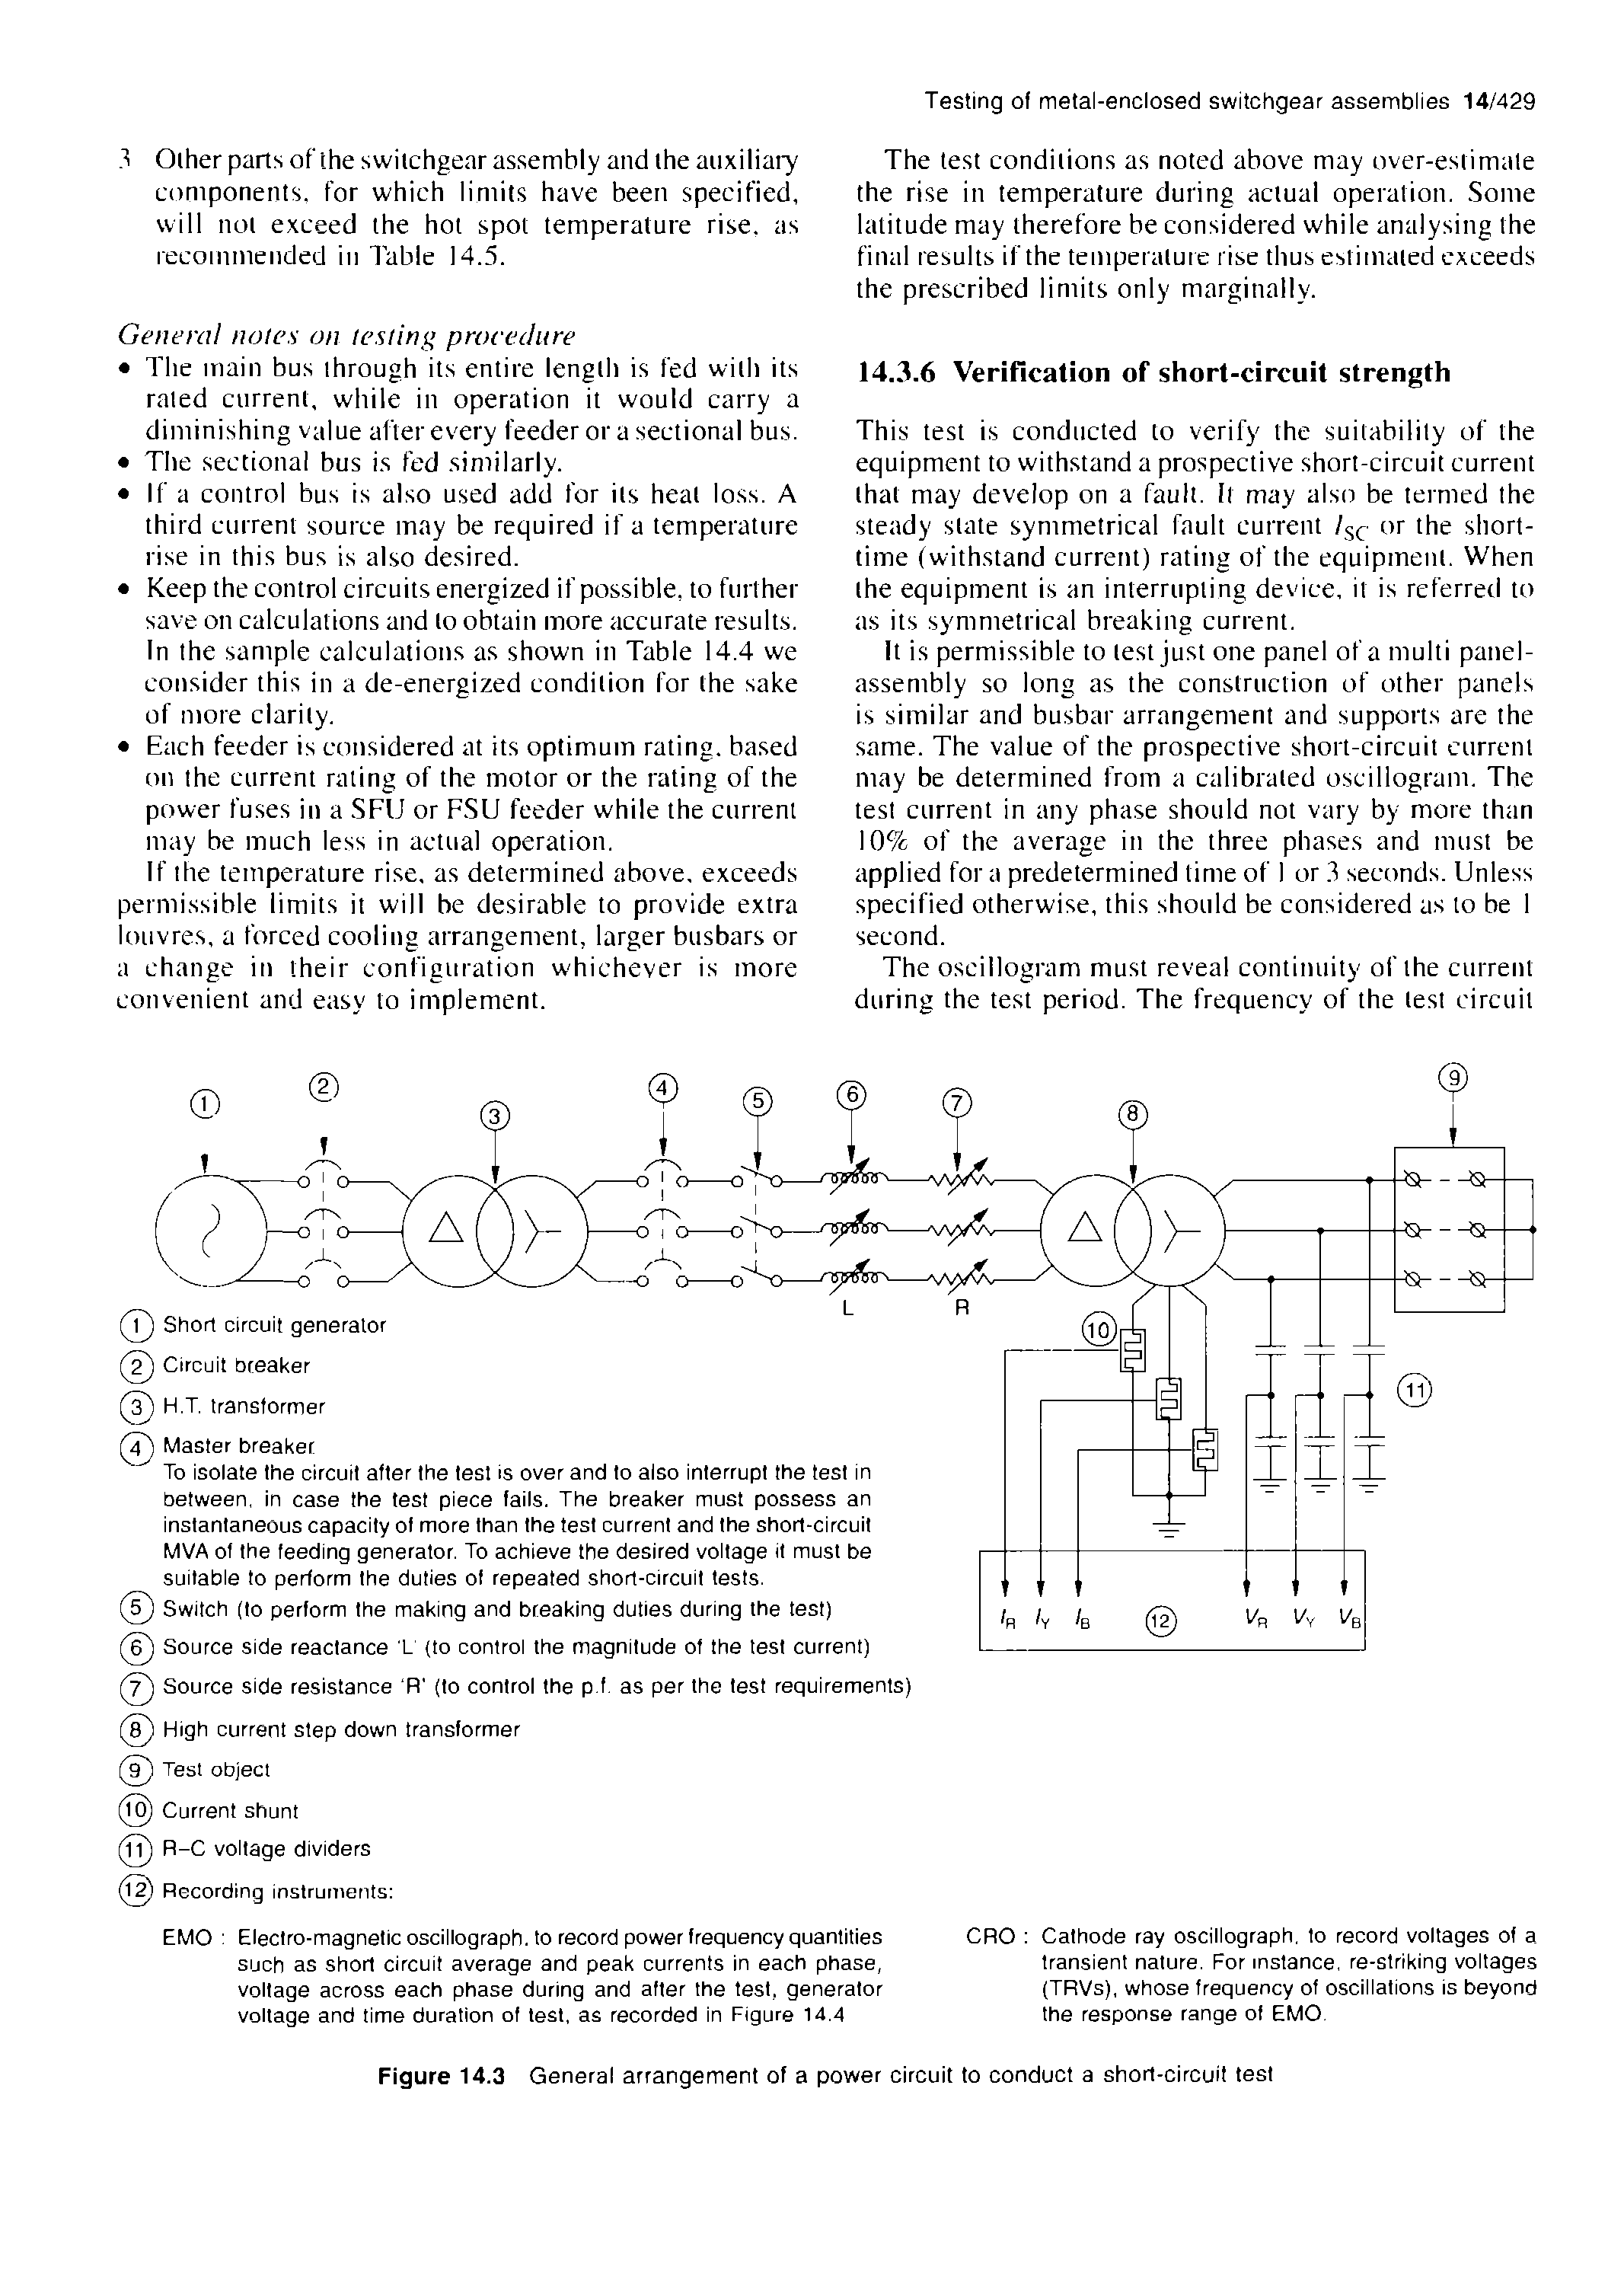 Figure 14.3 General arrangement of a power circuit to conduct a short-circuit test...